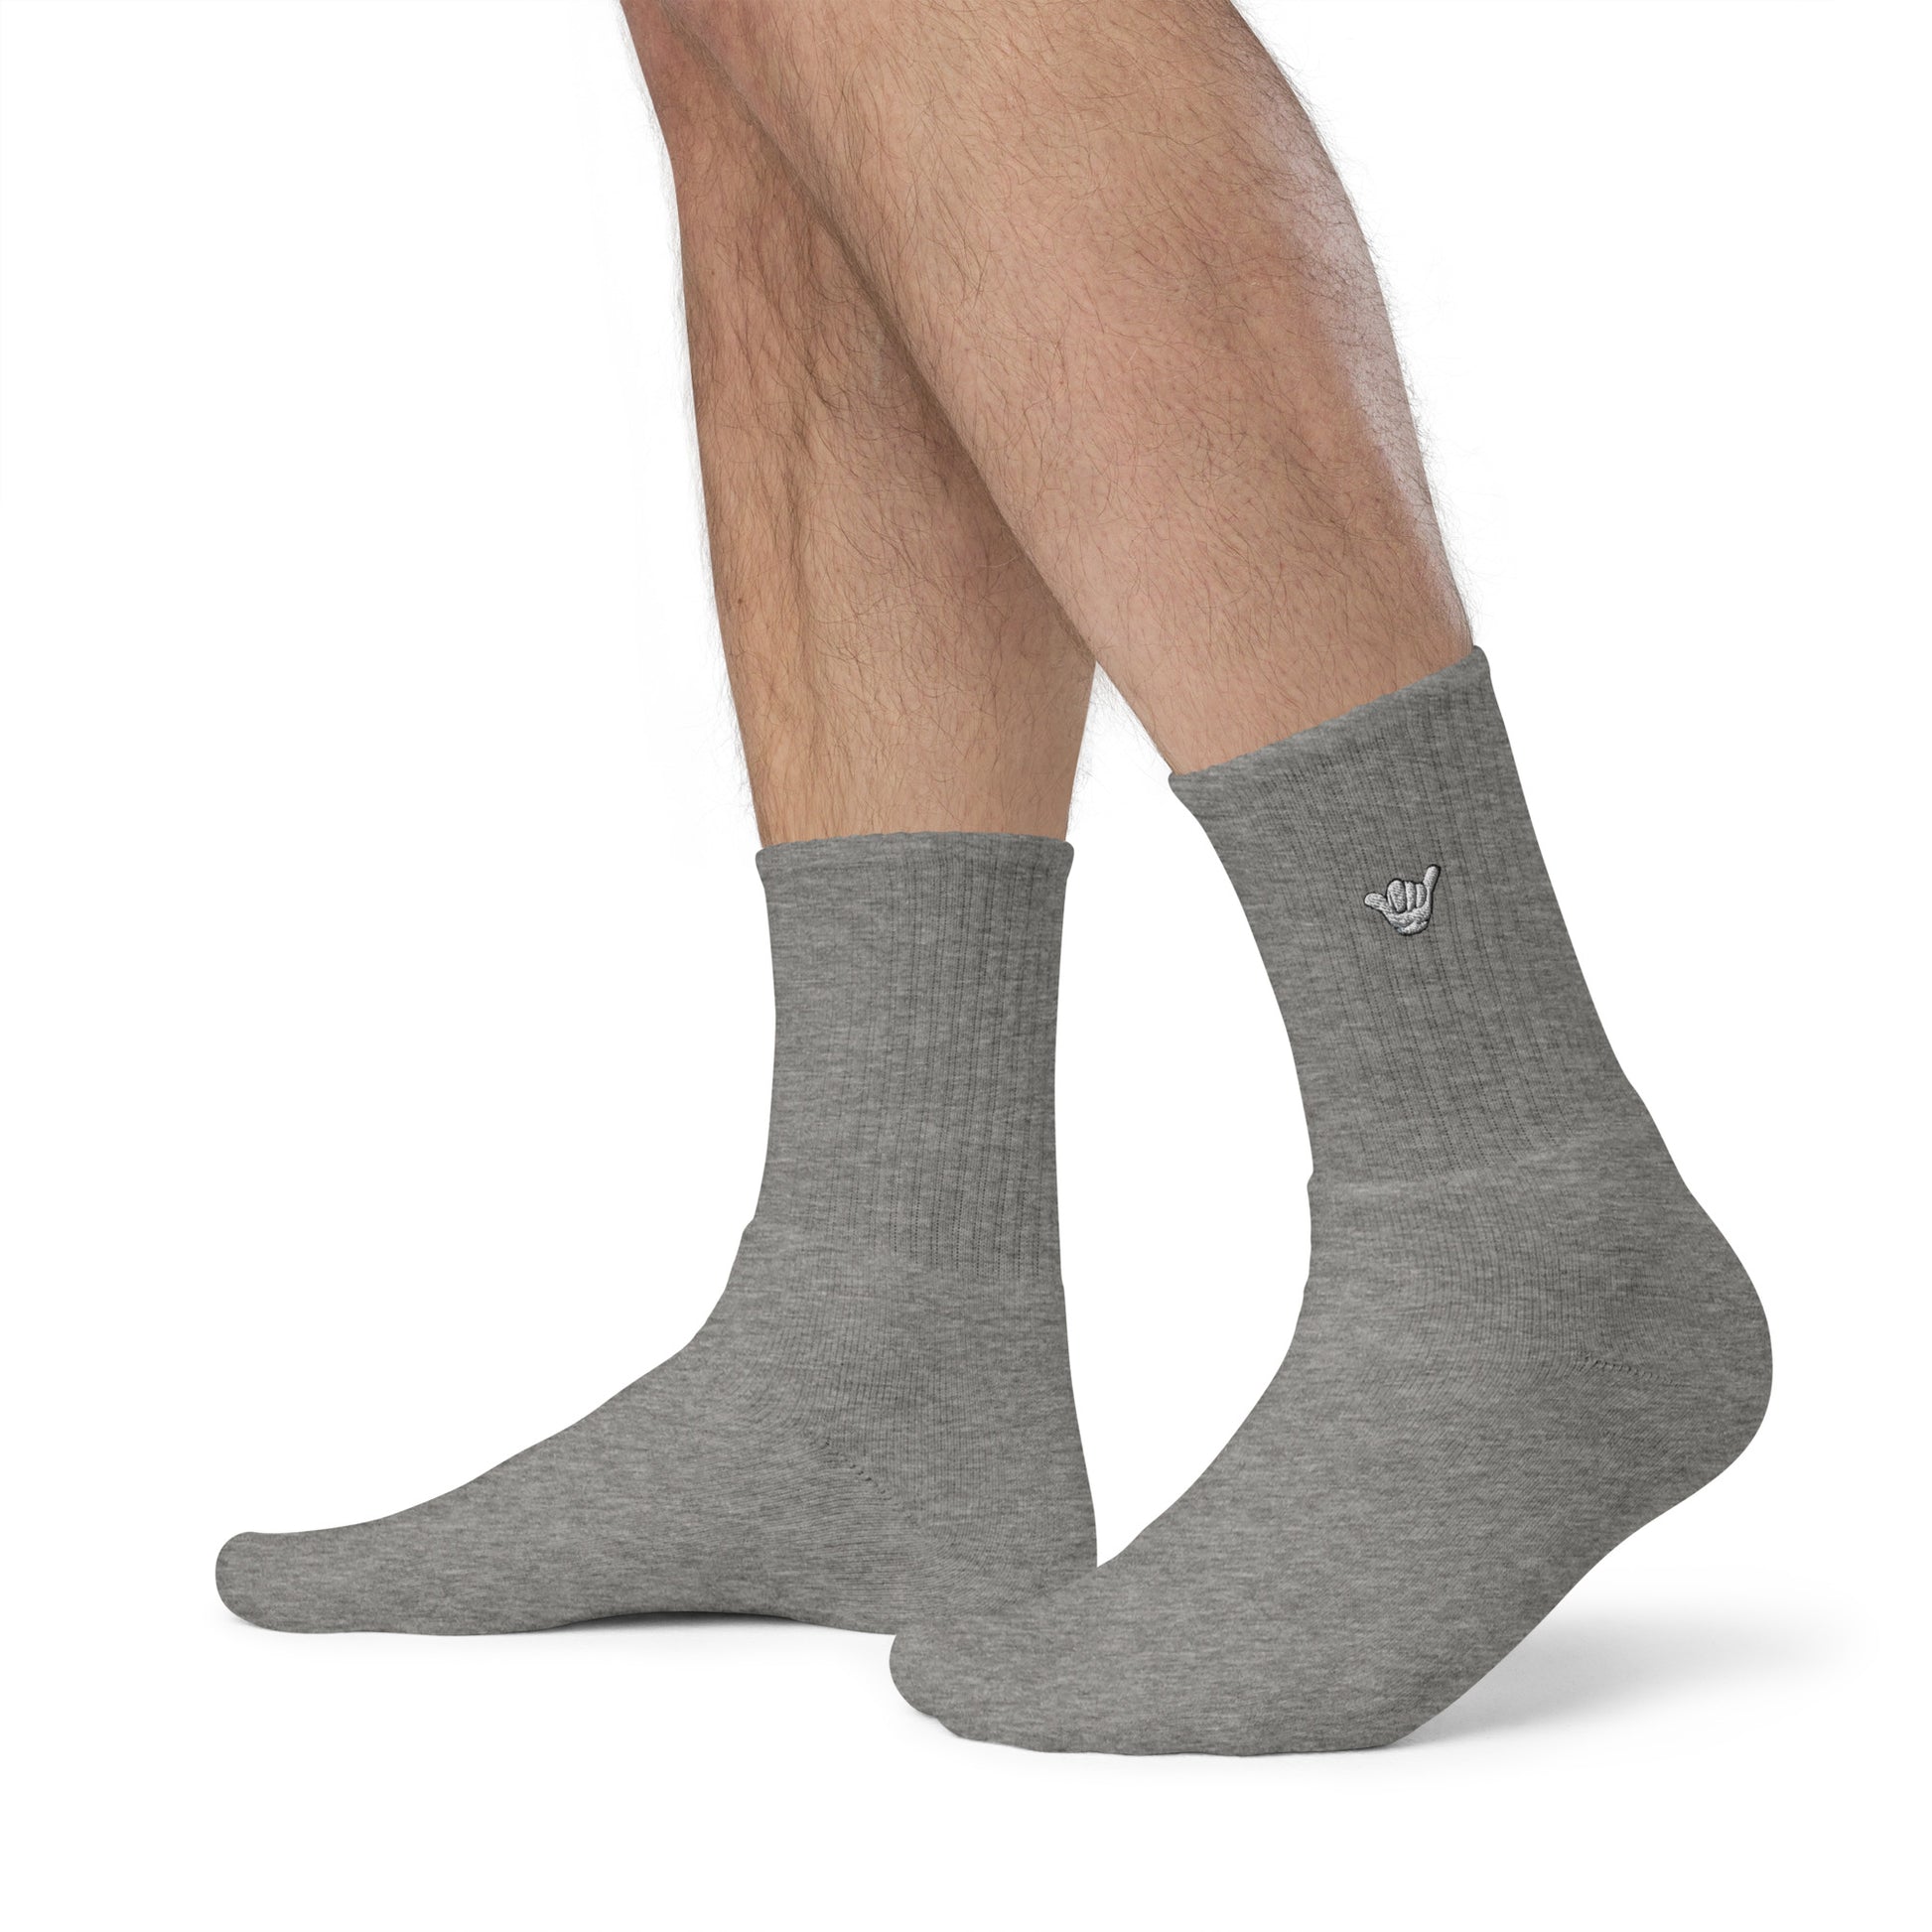  socks-from-the-side-with-cartoon-symbol